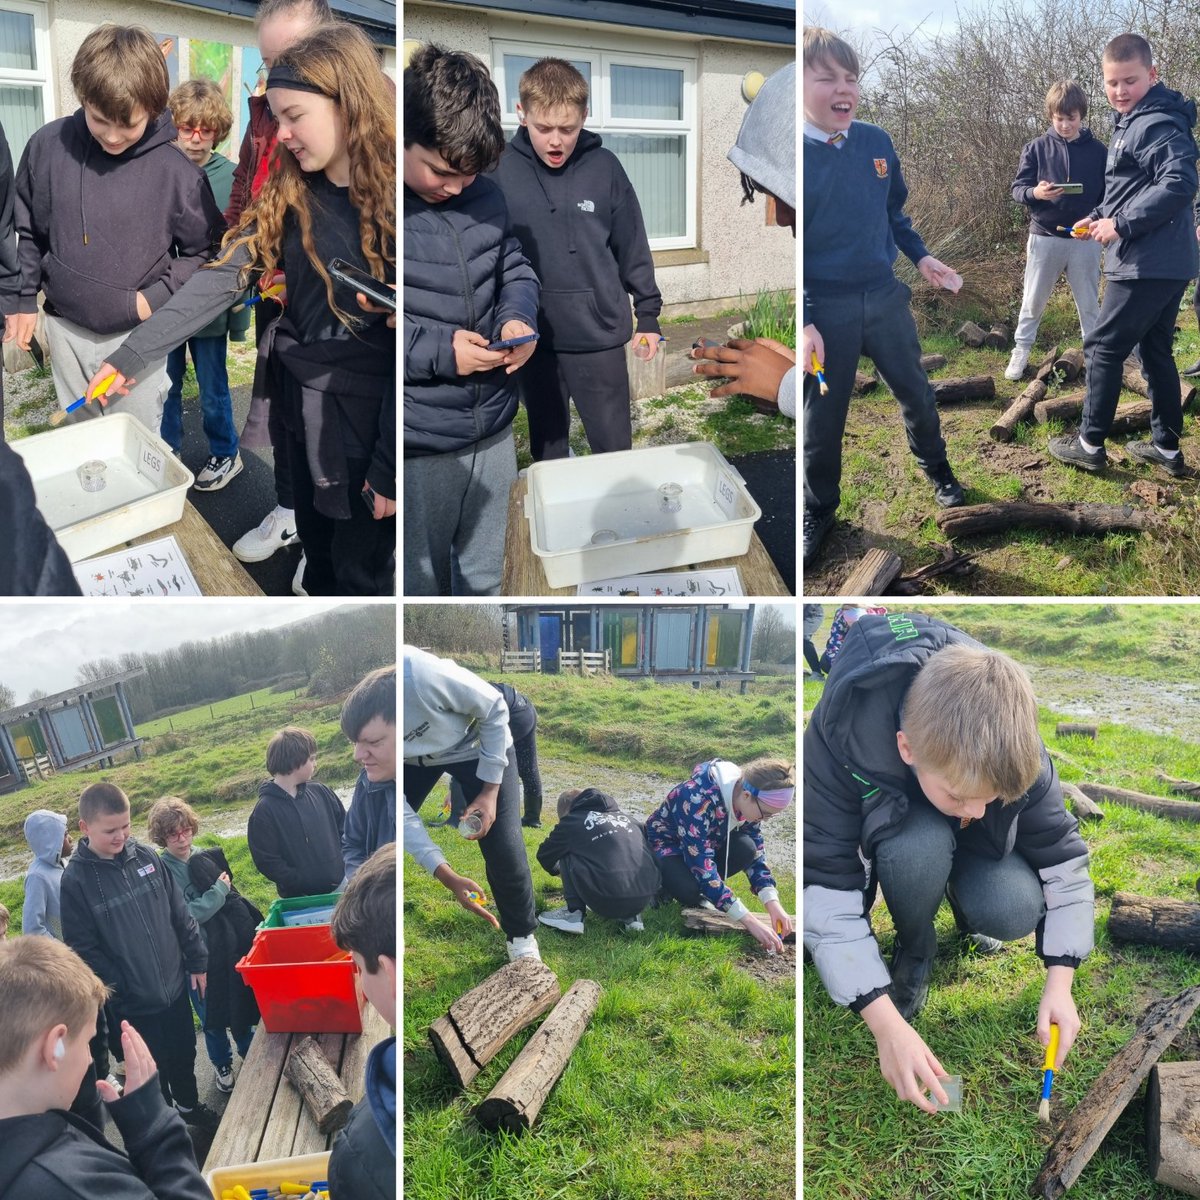 Our Year 7 Dyfodol class visited @WWTLlanelli today, where they participated in various habitat activities such as pond dipping. A huge thank you to the wardens for providing such an engaging and worthwhile experience #ethicalandinformedcitizens